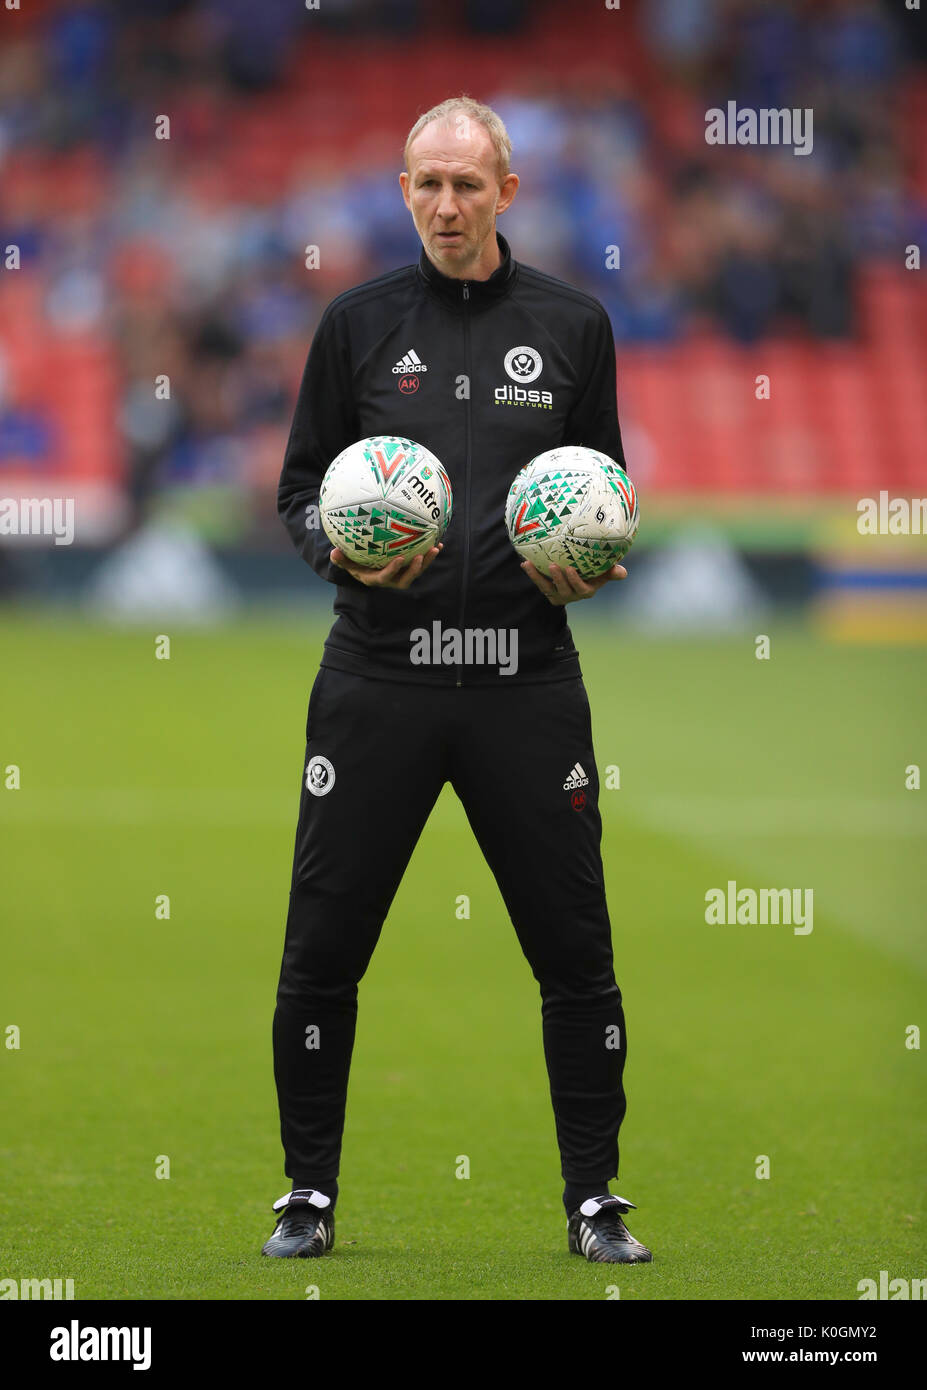 Sheffield United Assistant Manager Alan Knill during the Carabao Cup, Second Round match at Bramall Lane, Sheffield. PRESS ASSOCIATION Photo. Picture date: Tuesday August 22, 2017. See PA story SOCCER Sheff Utd. Photo credit should read: Tim Goode/PA Wire. RESTRICTIONS: No use with unauthorised audio, video, data, fixture lists, club/league logos or 'live' services. Online in-match use limited to 75 images, no video emulation. No use in betting, games or single club/league/player publications. Stock Photo